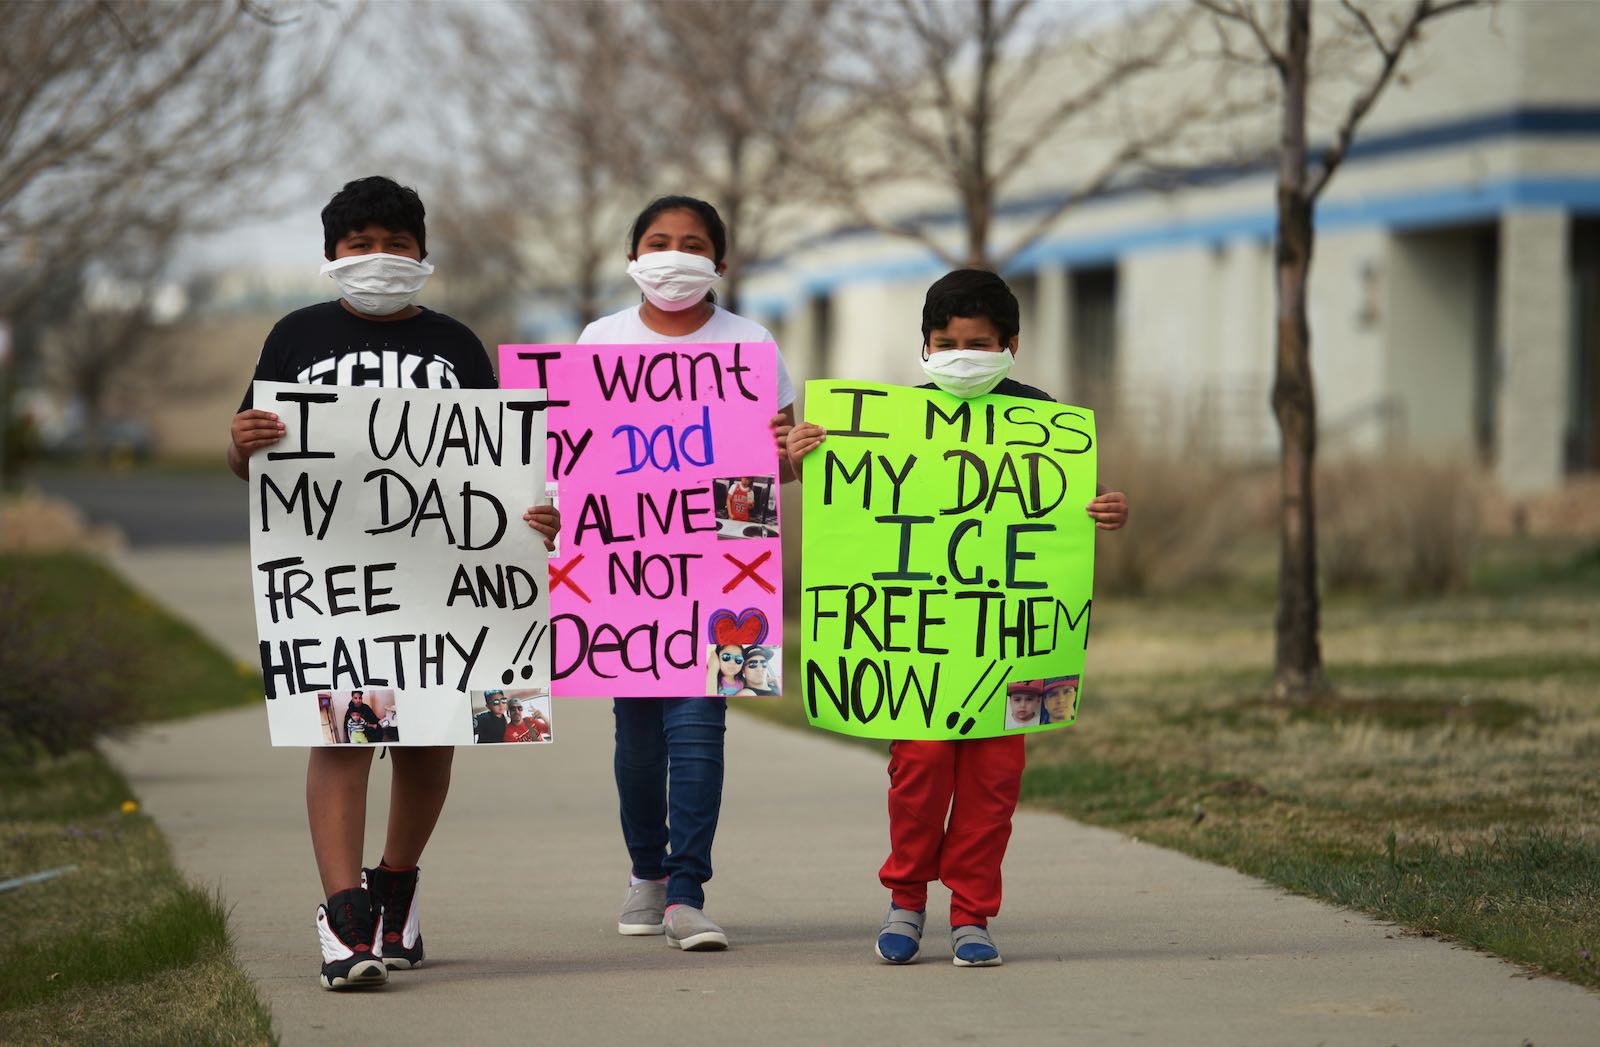 Children protesting at an ICE center